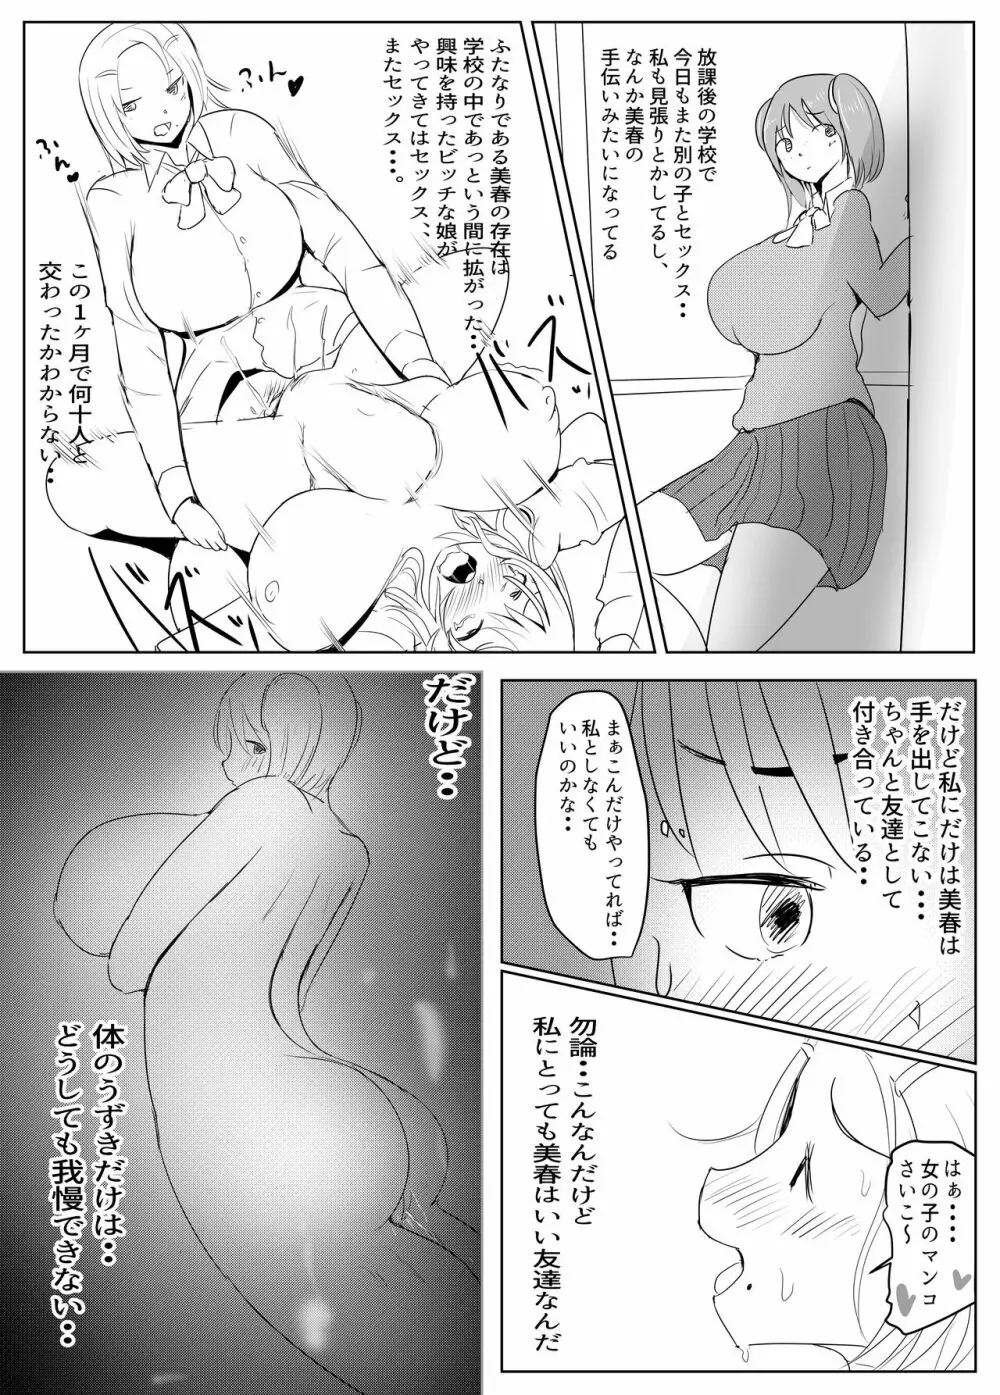 Diary Of An Easy Futanari Girl ~Girls-Only Breeding Meeting Part 3 Episodes 2 and 3 Page.7